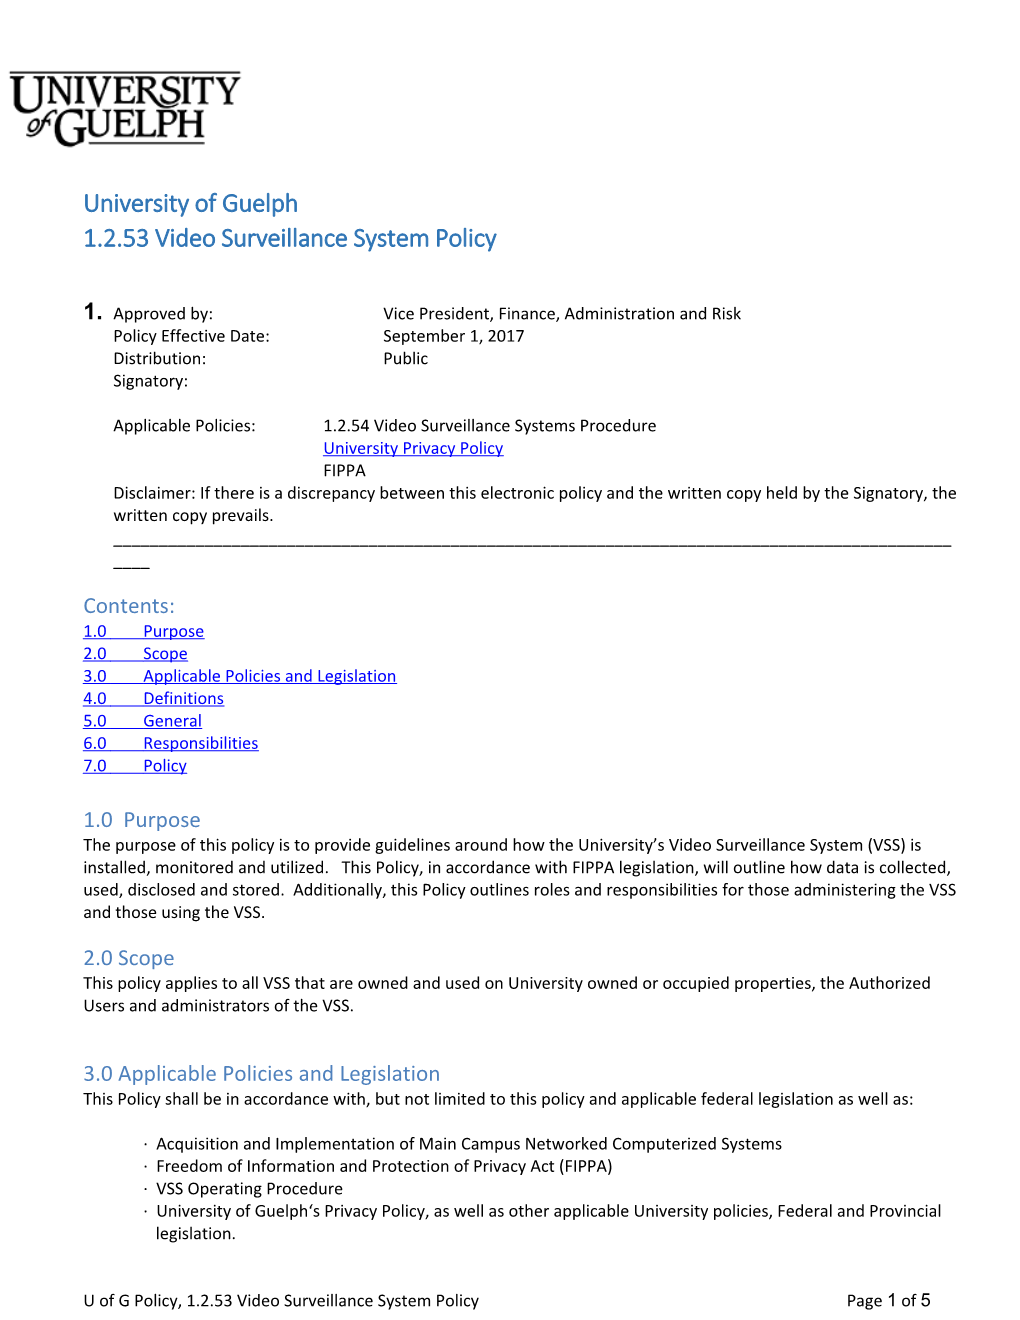 1.2.53 Video Surveillance System Policy